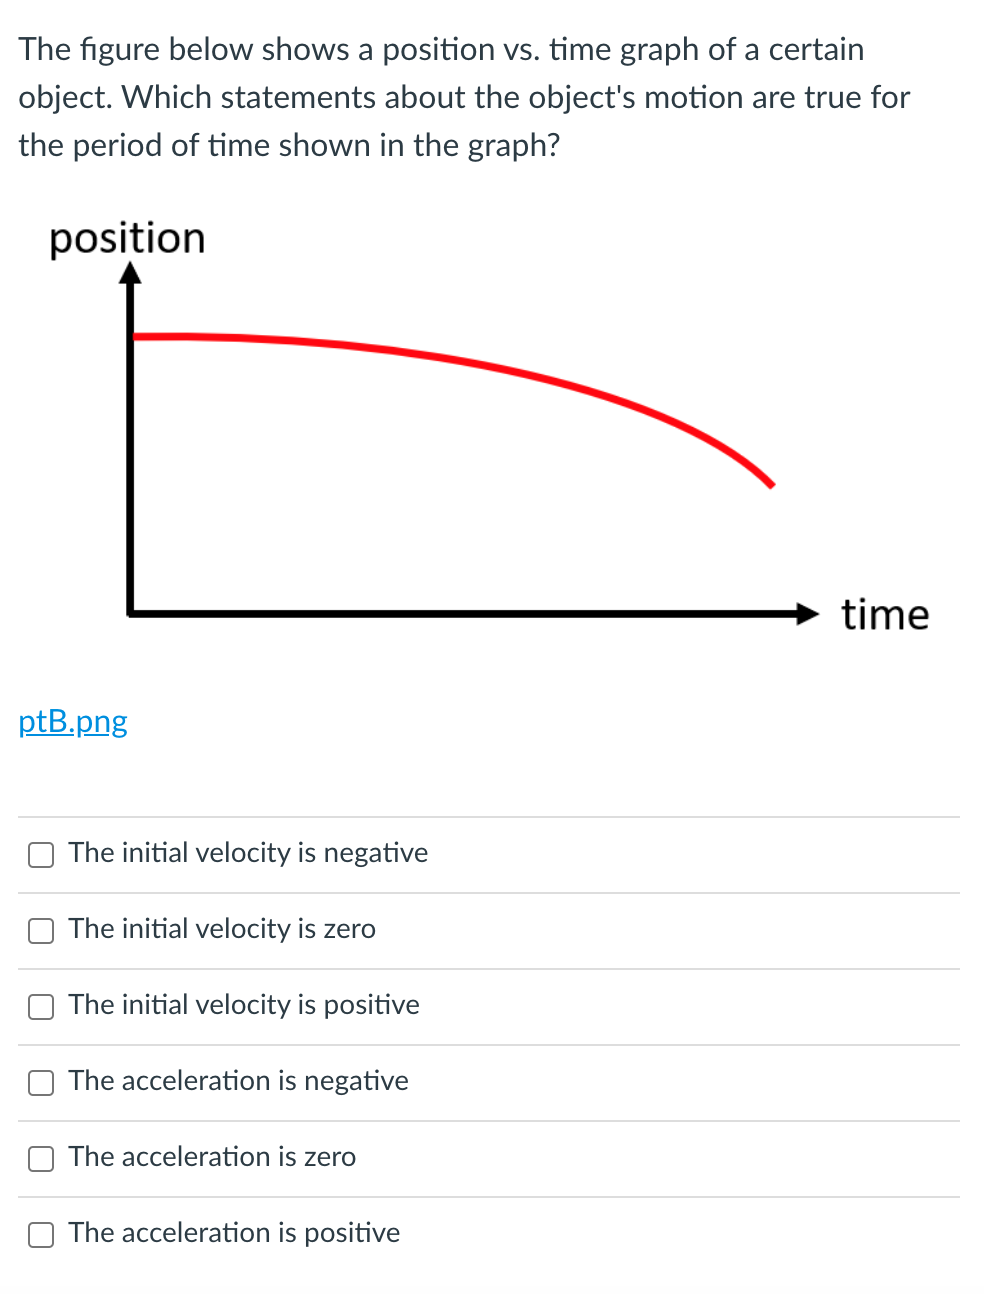 The figure below shows a position vs. time graph of a certain
object. Which statements about the object's motion are true for
the period of time shown in the graph?
position
time
ptB.png
The initial velocity is negative
The initial velocity is zero
The initial velocity is positive
The acceleration is negative
The acceleration is zero
The acceleration is positive
